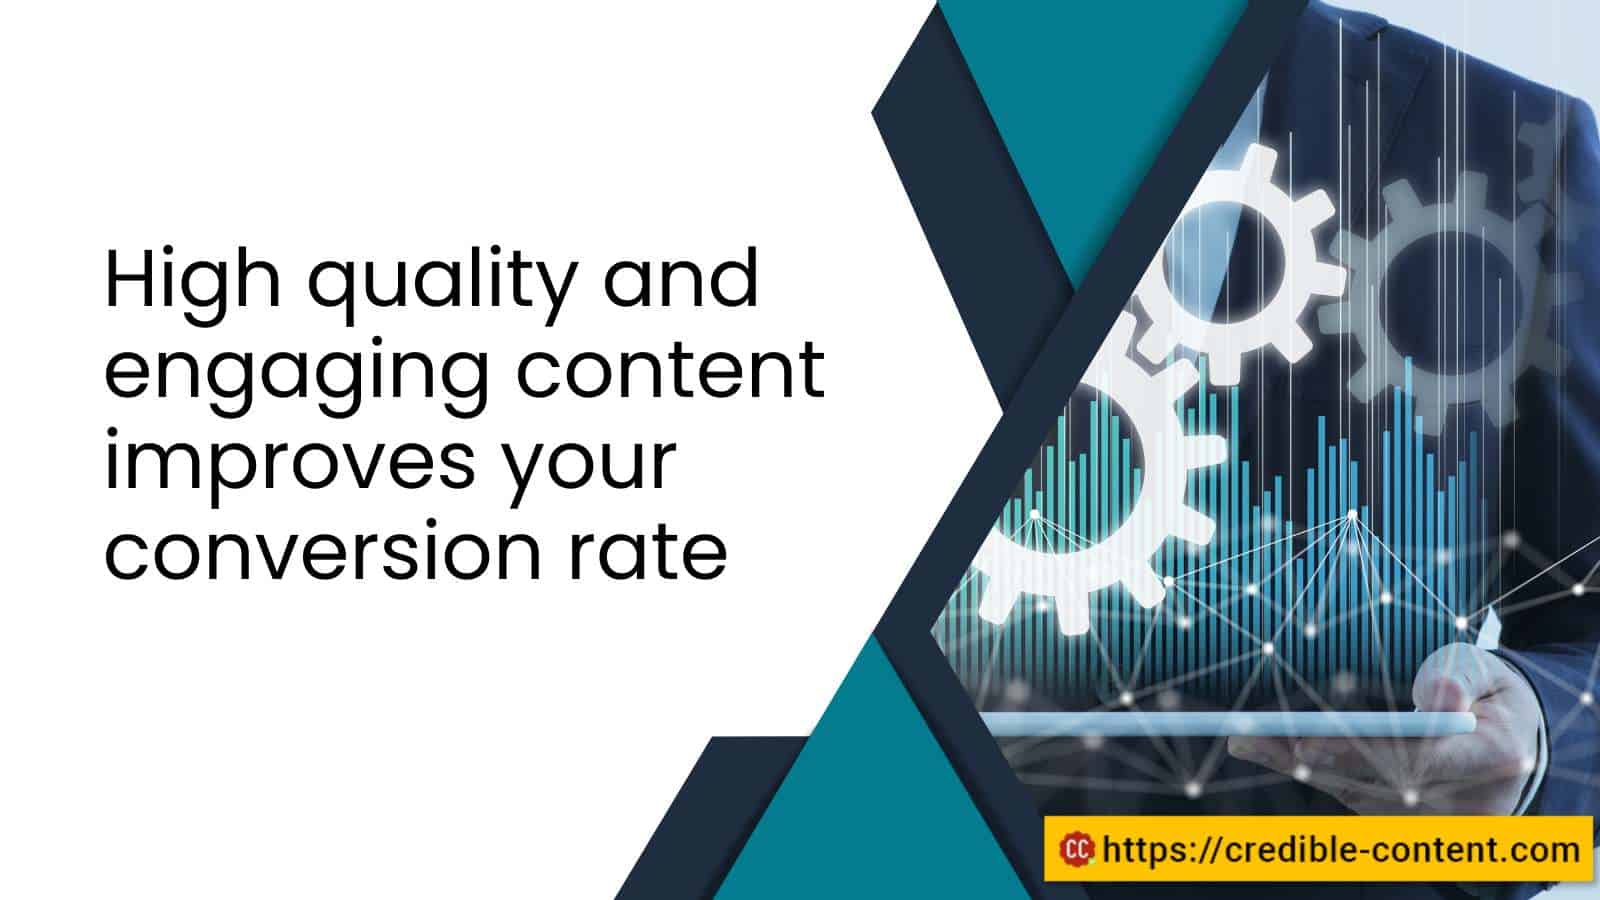 High quality and engaging content improves your conversion rate